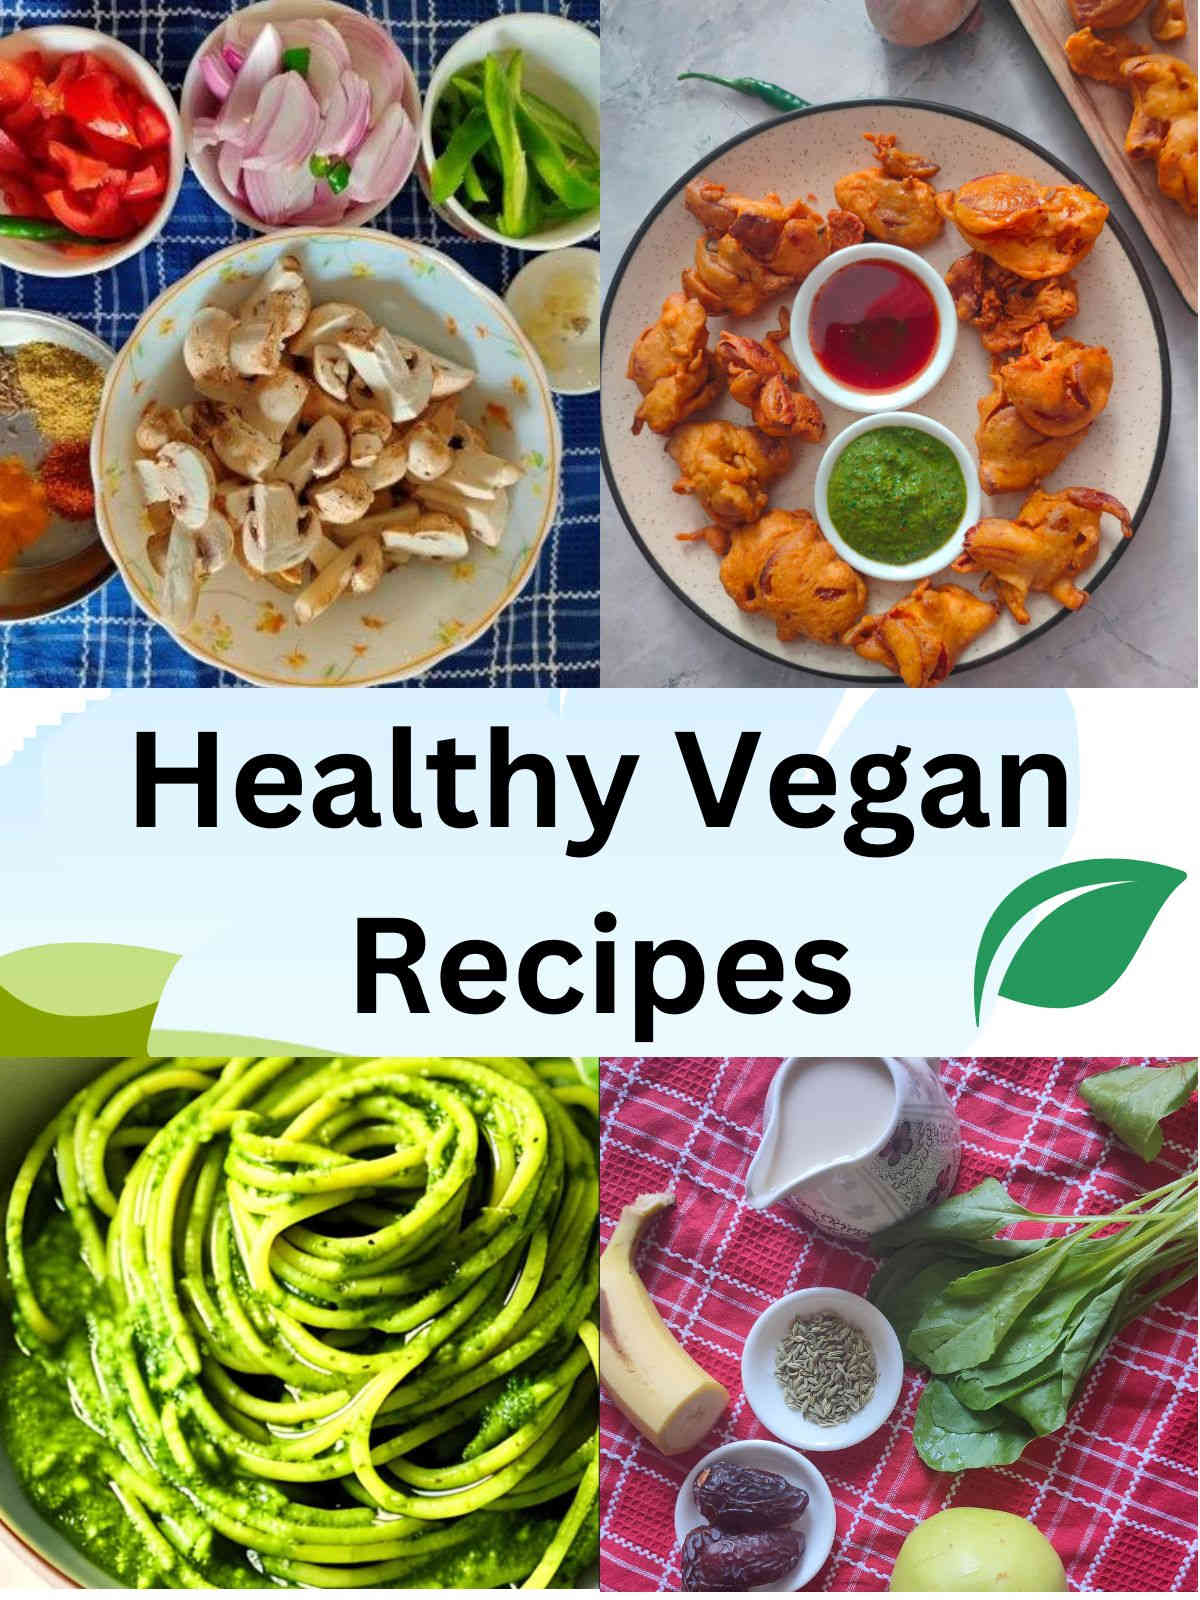 Healthy Vegan Recipes low calorie and easy 